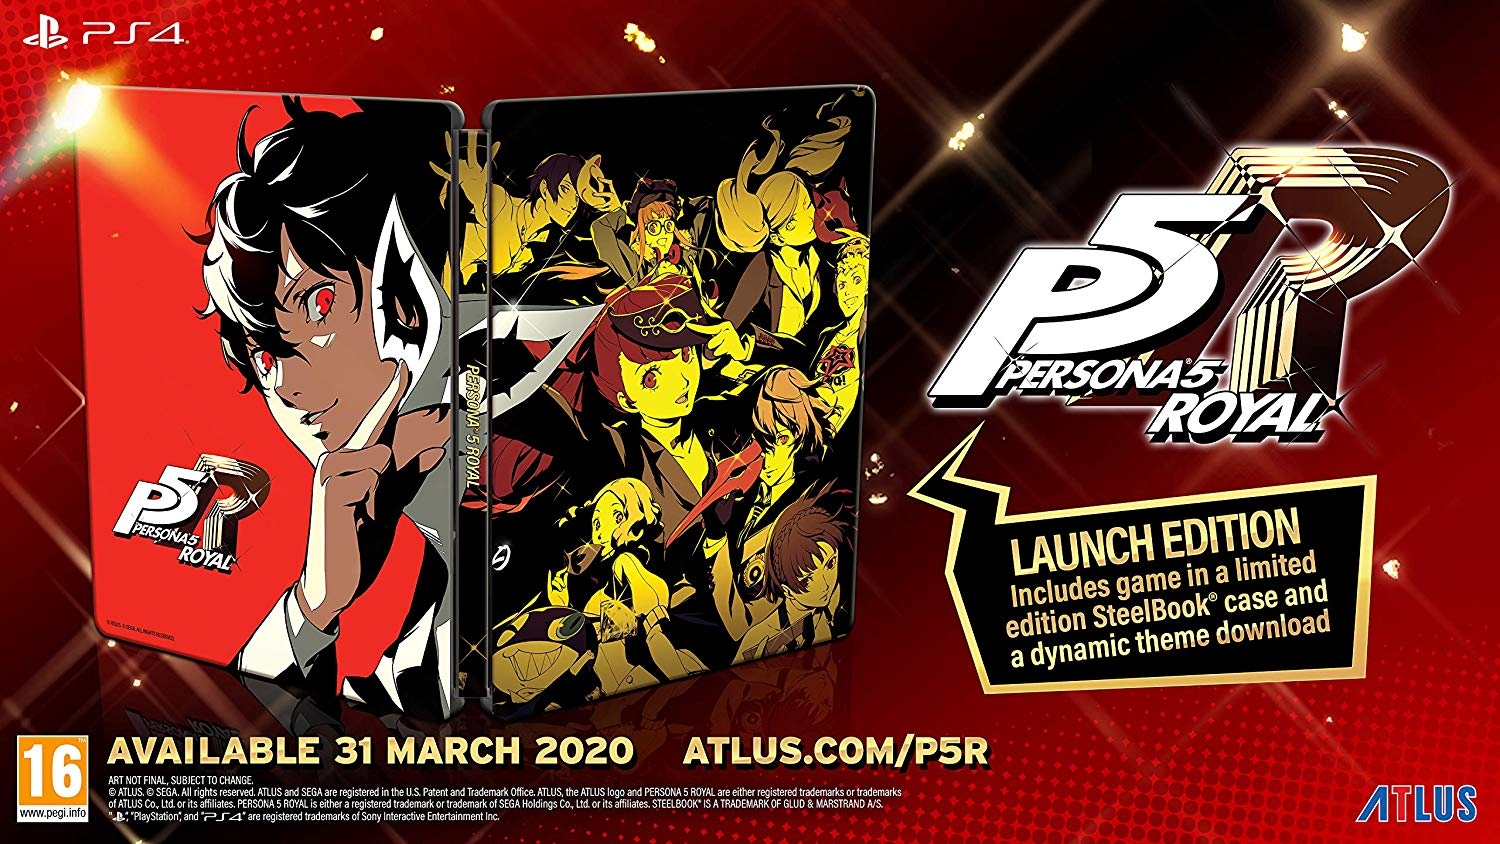 PS4 Persona 5 Royale Launch Edition